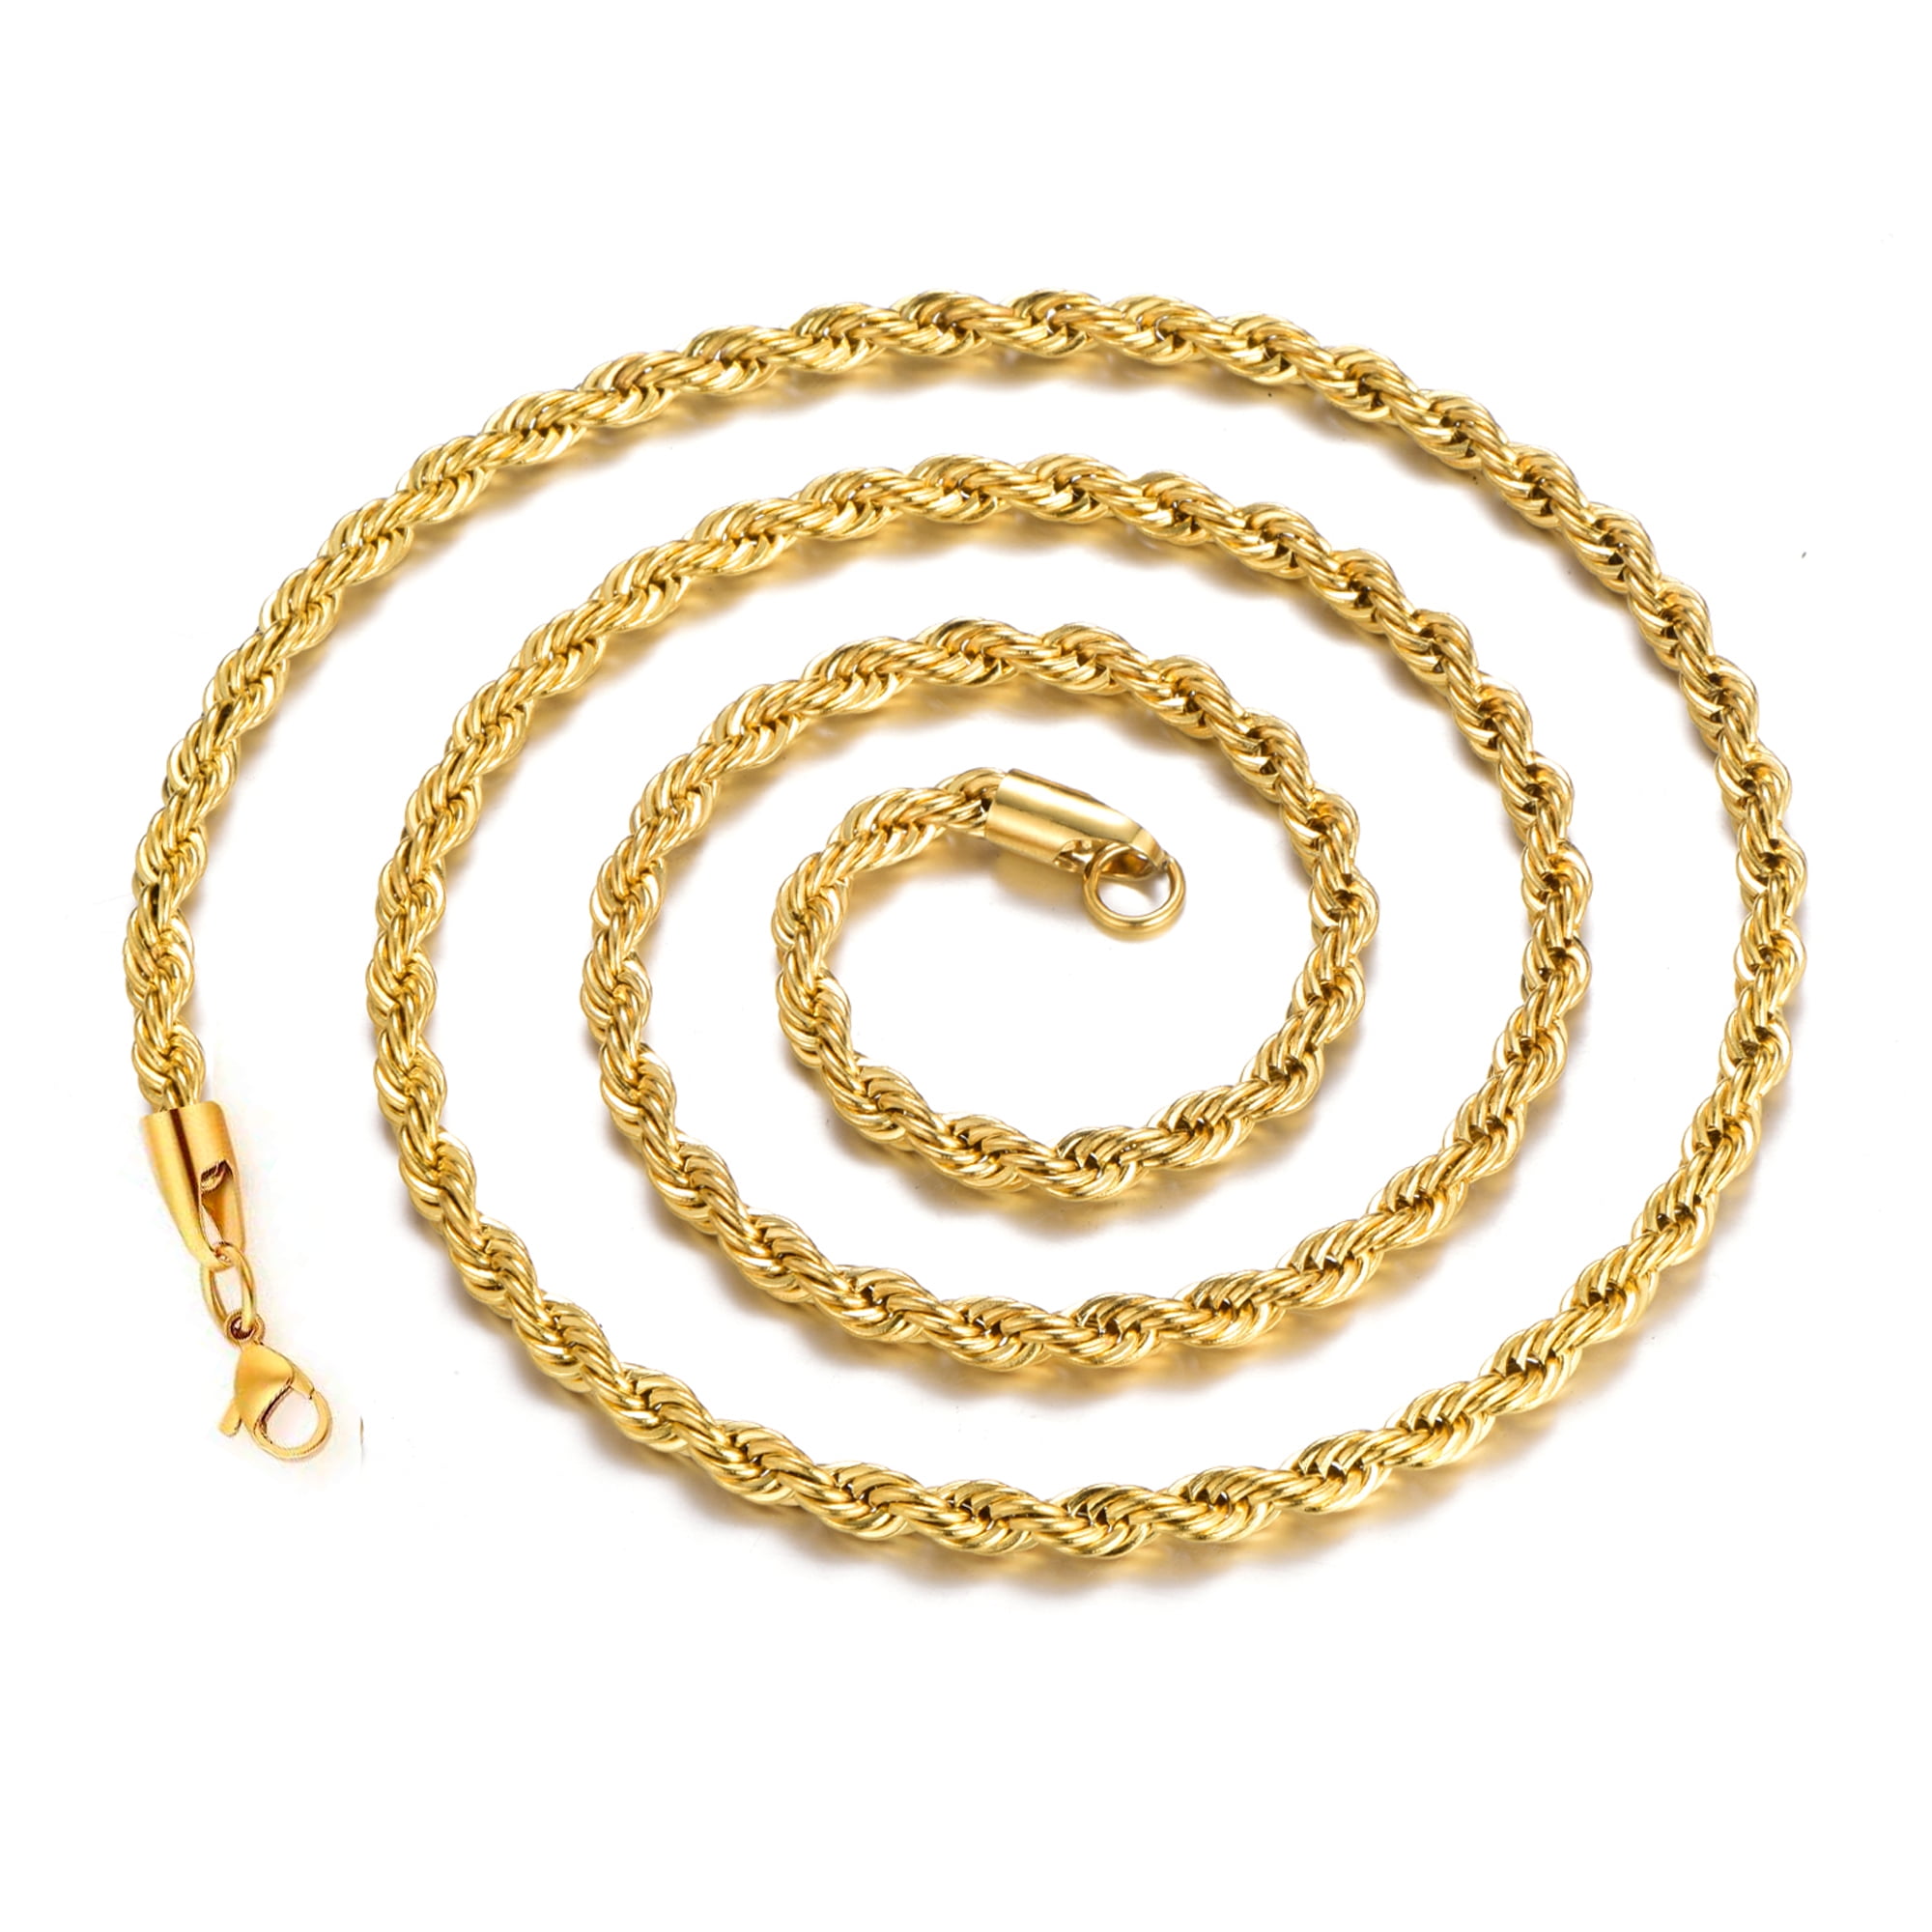 Yellow Stainless Steel Unisex 2mm 20 Inch Rope Fashion Chain Necklace  Jewelry Gifts for Women - Walmart.com